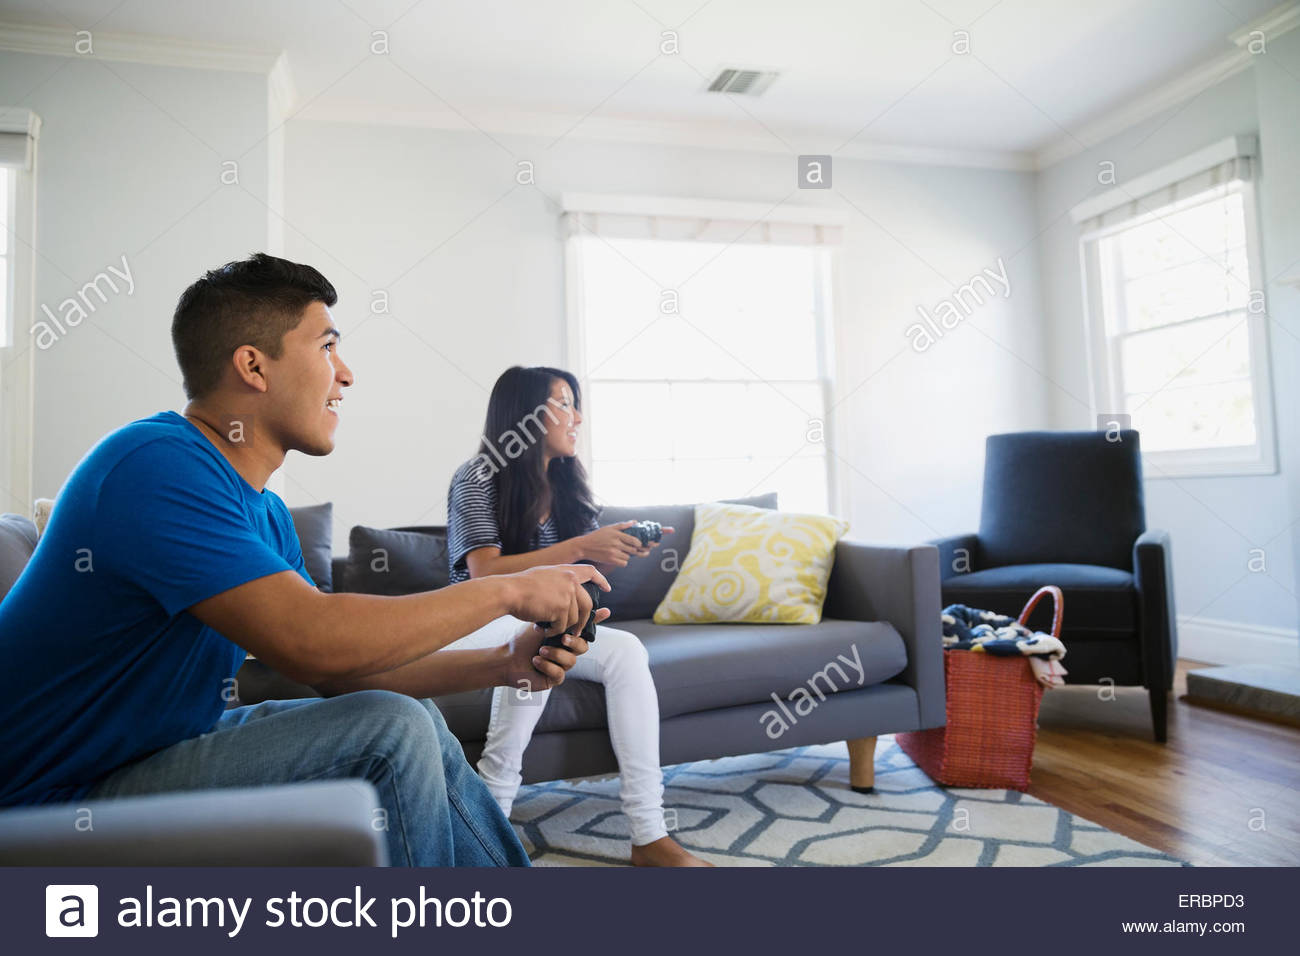 Teenage brother and sister playing video game Stock Photo